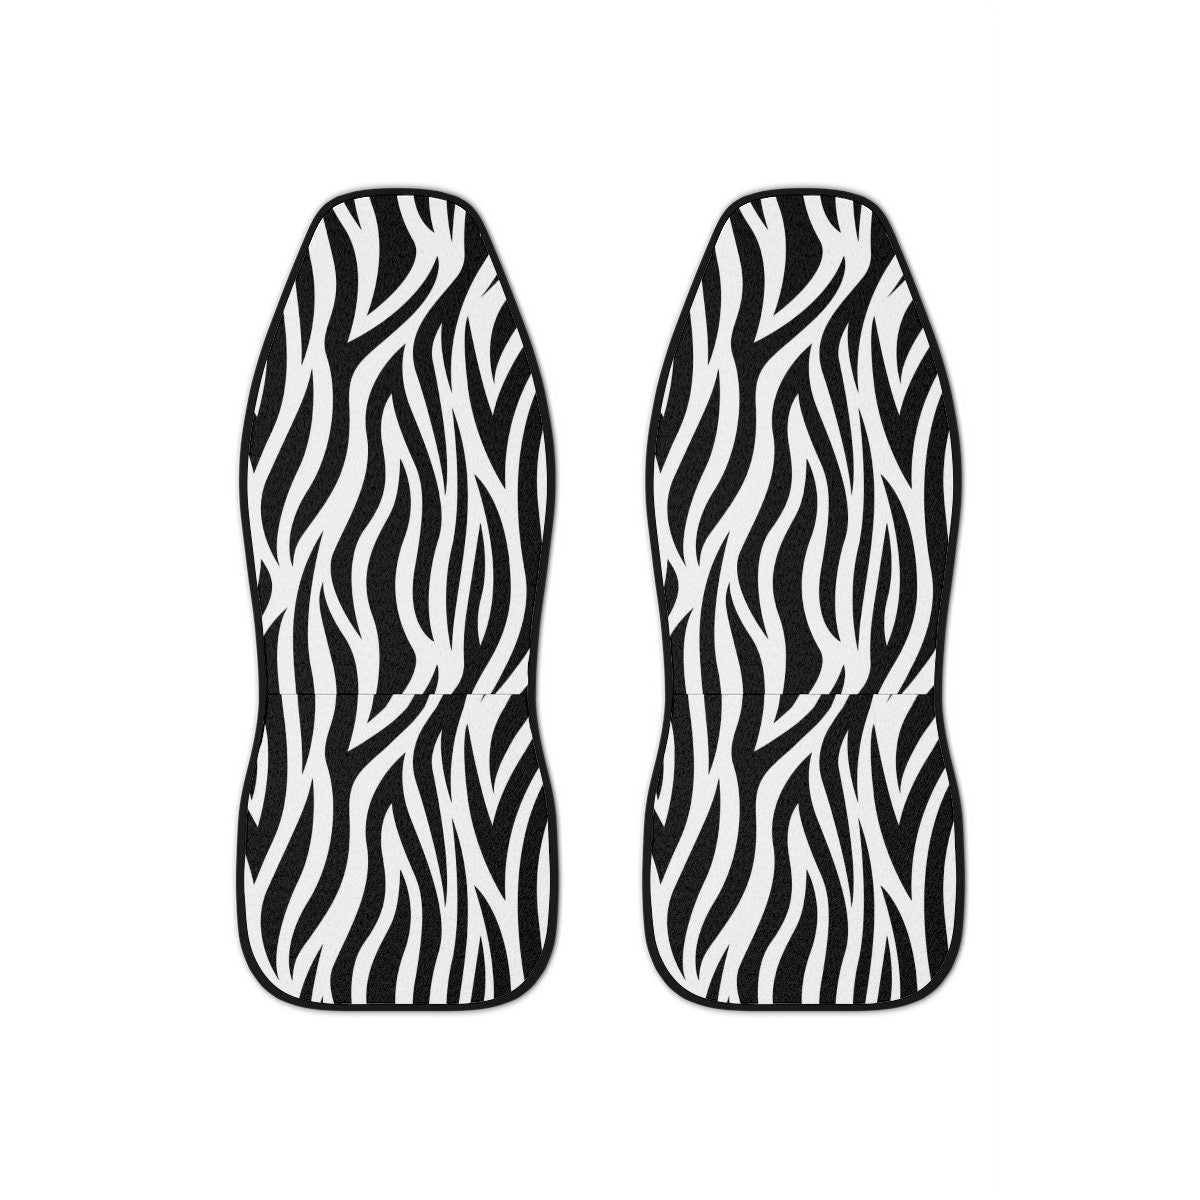 Seat Covers for Cars, Boho 70s Car Seat Cover, Cute Car Accessories for Women, Hippie Car Decor,  Zebra Groovy Universal Vehicle Chair Cover HMDesignStudioUS